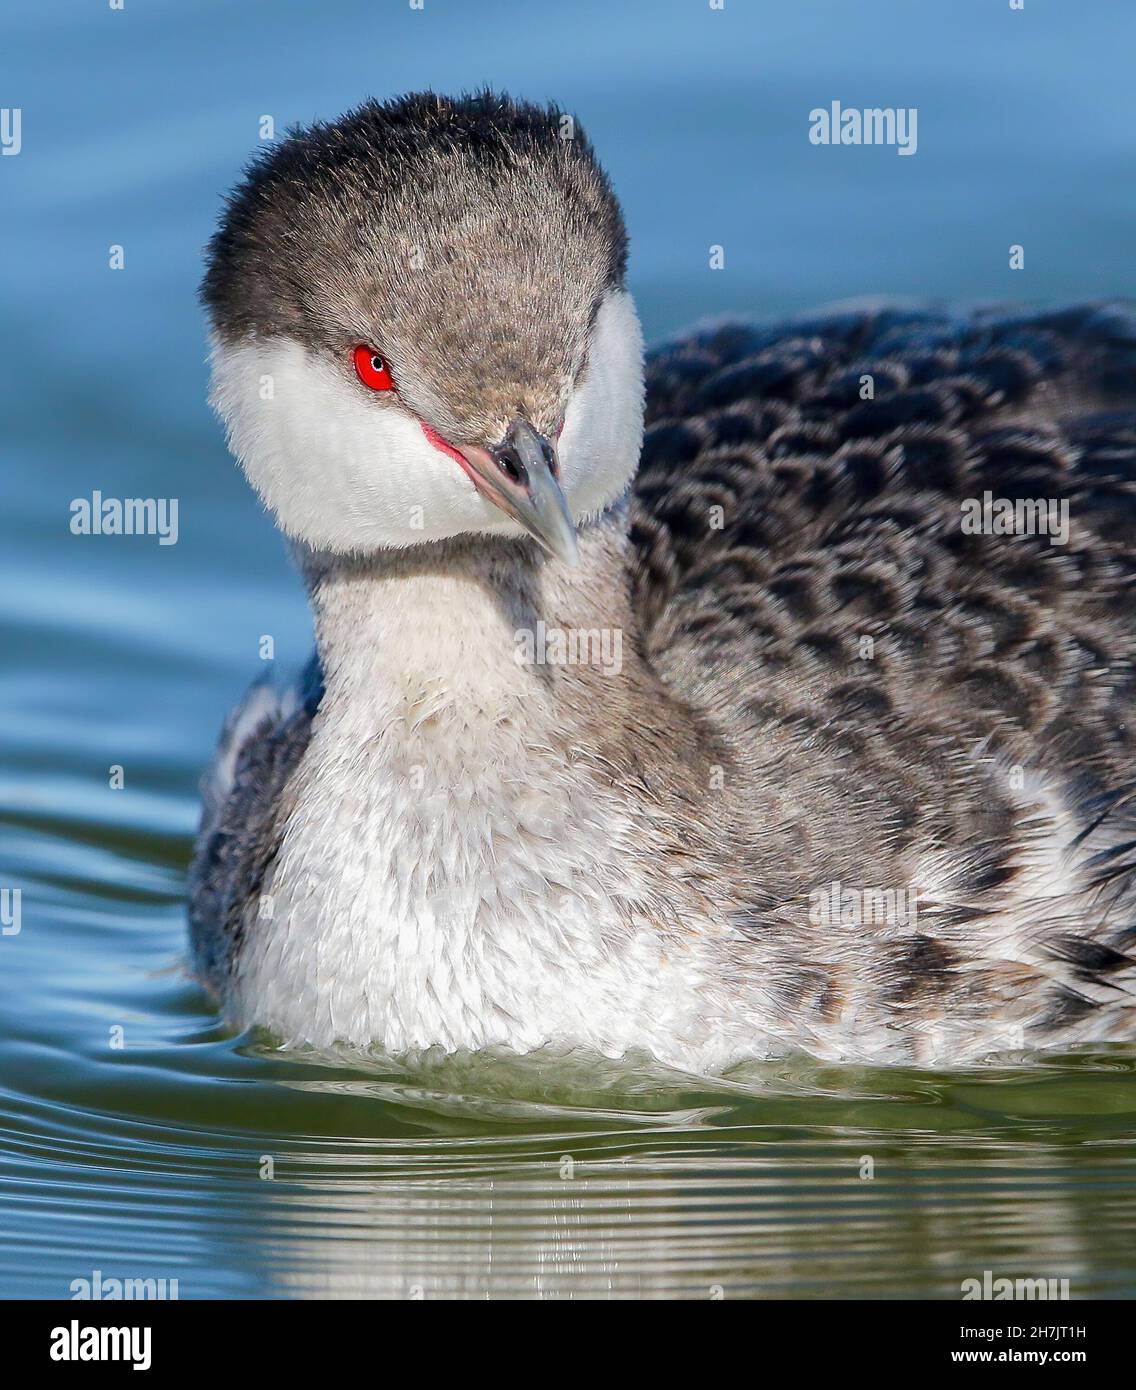 This extreme closeup calls attention to the interesting details of the Horned Grebe's eye, observable only at very close range. Stock Photo